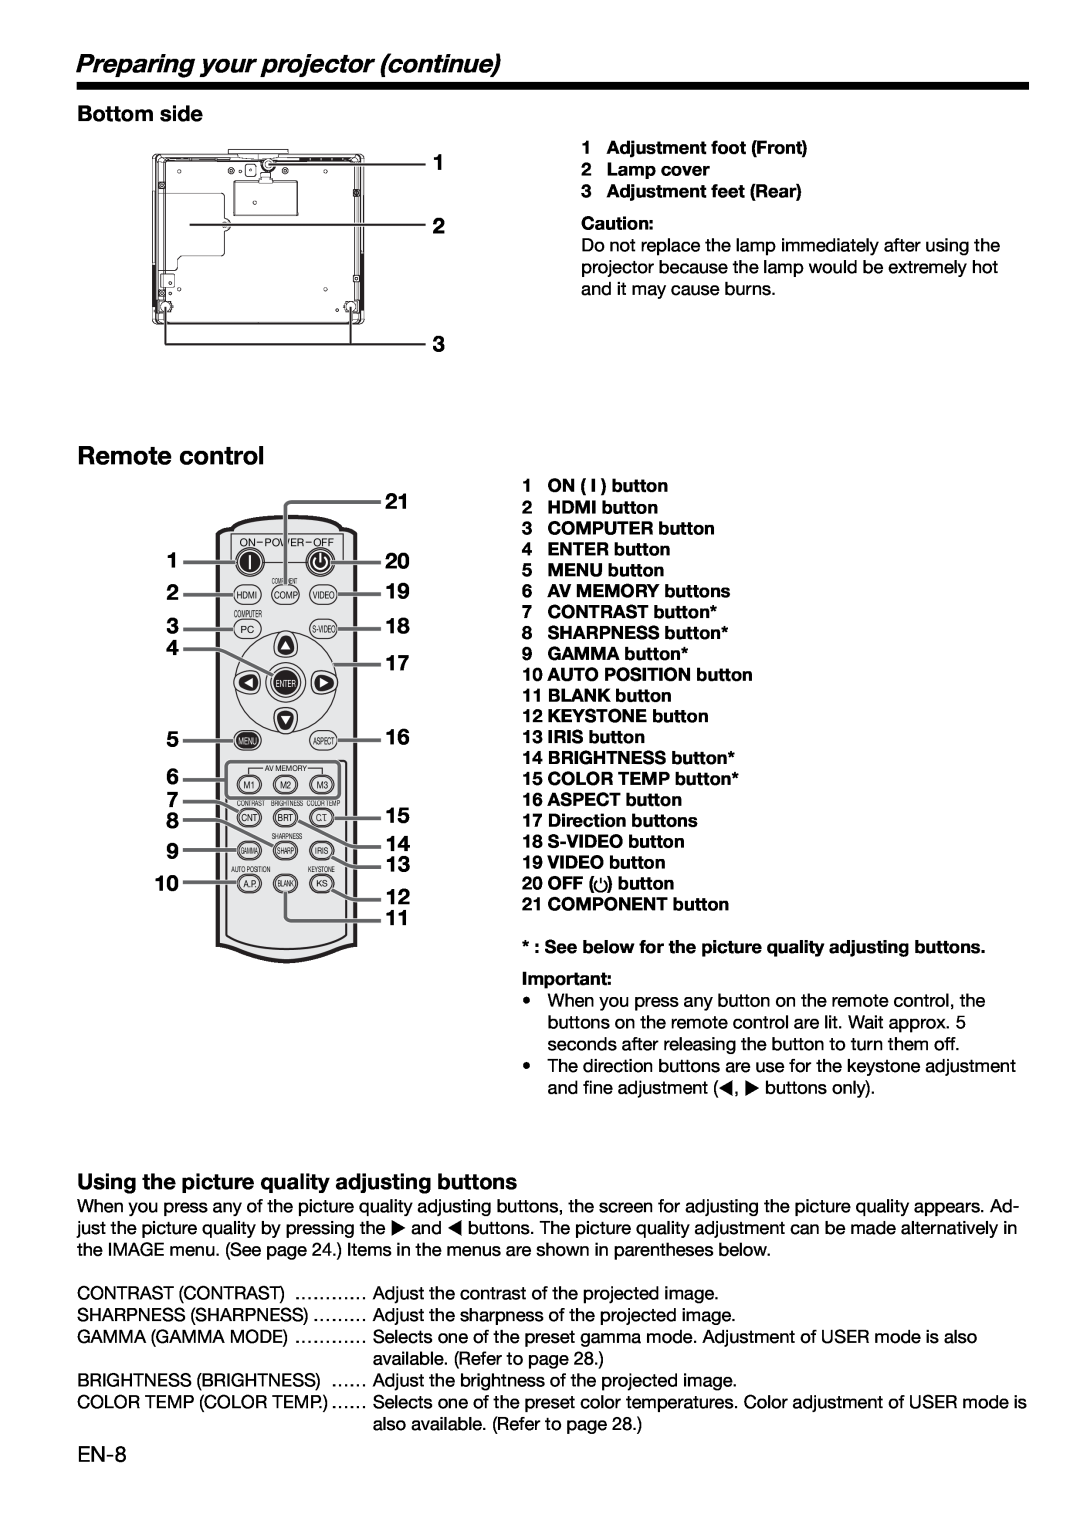 Mitsubishi Electronics HC3000 user manual Preparing your projector continue, Remote control, Bottom side, COMPONENT button 